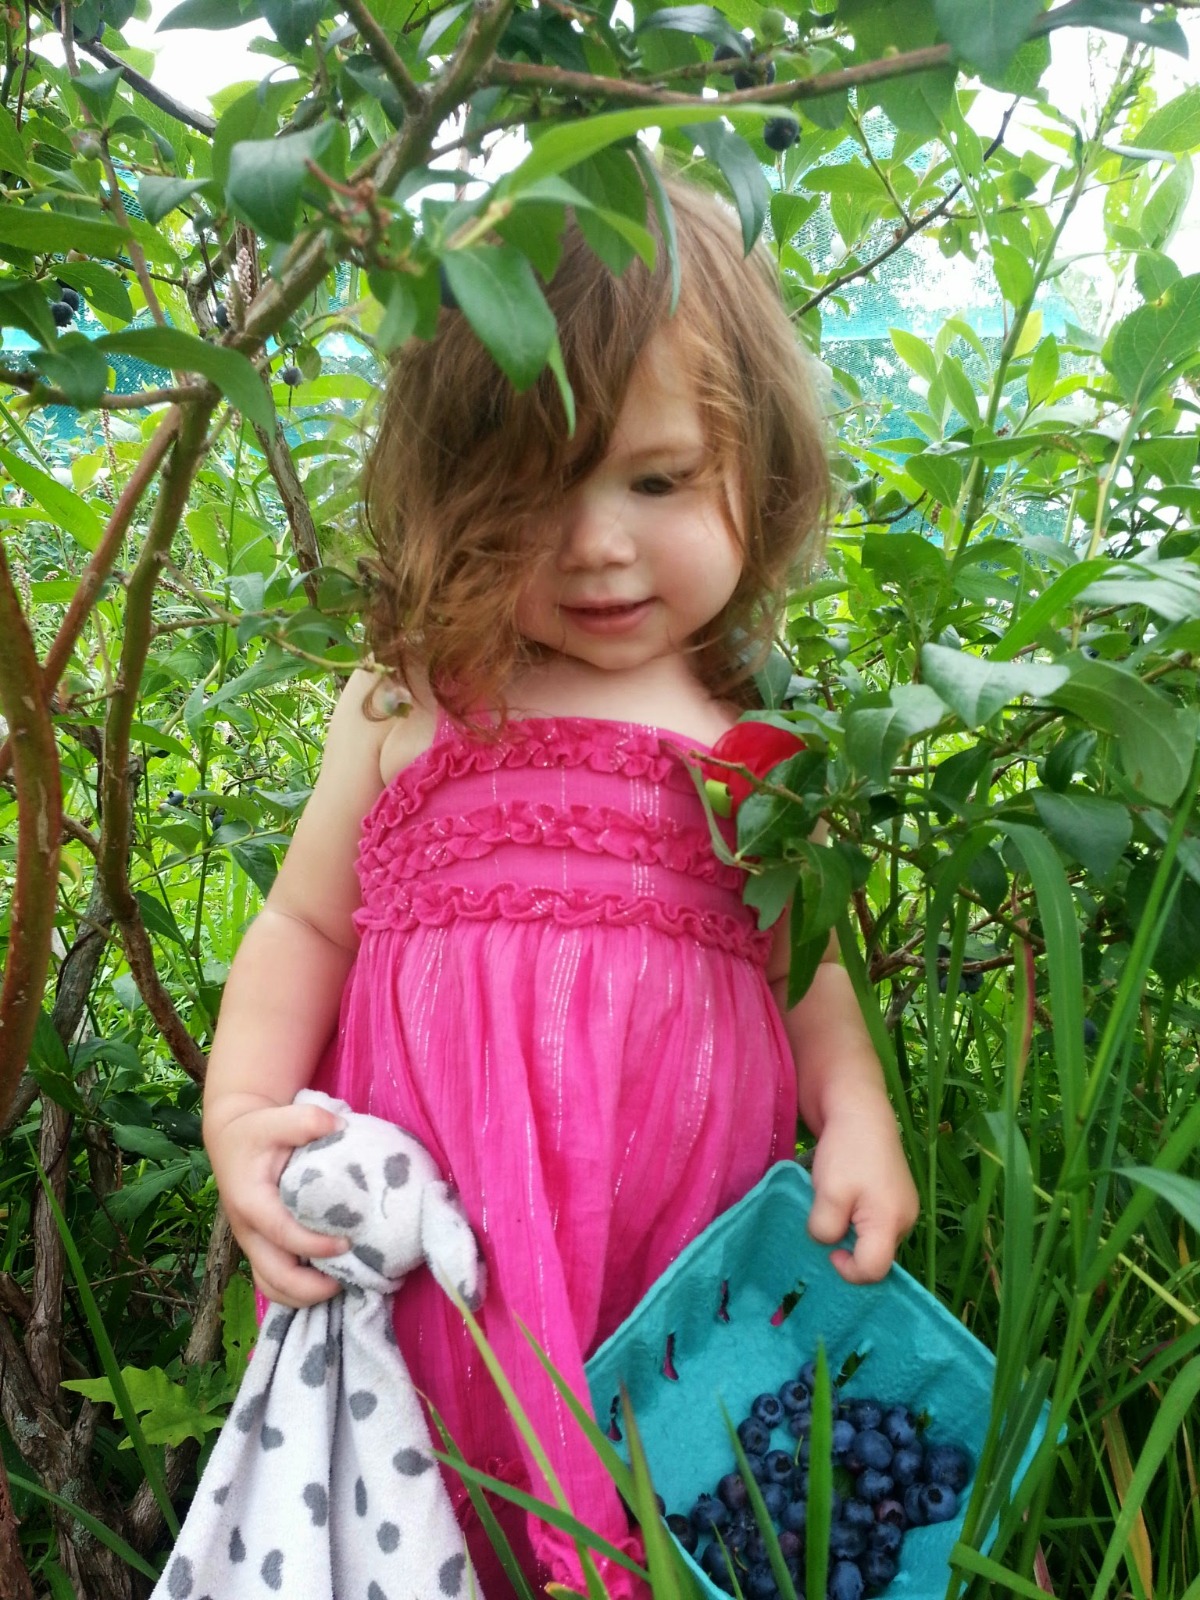 Young toddler picking blueberries under blueberry netting